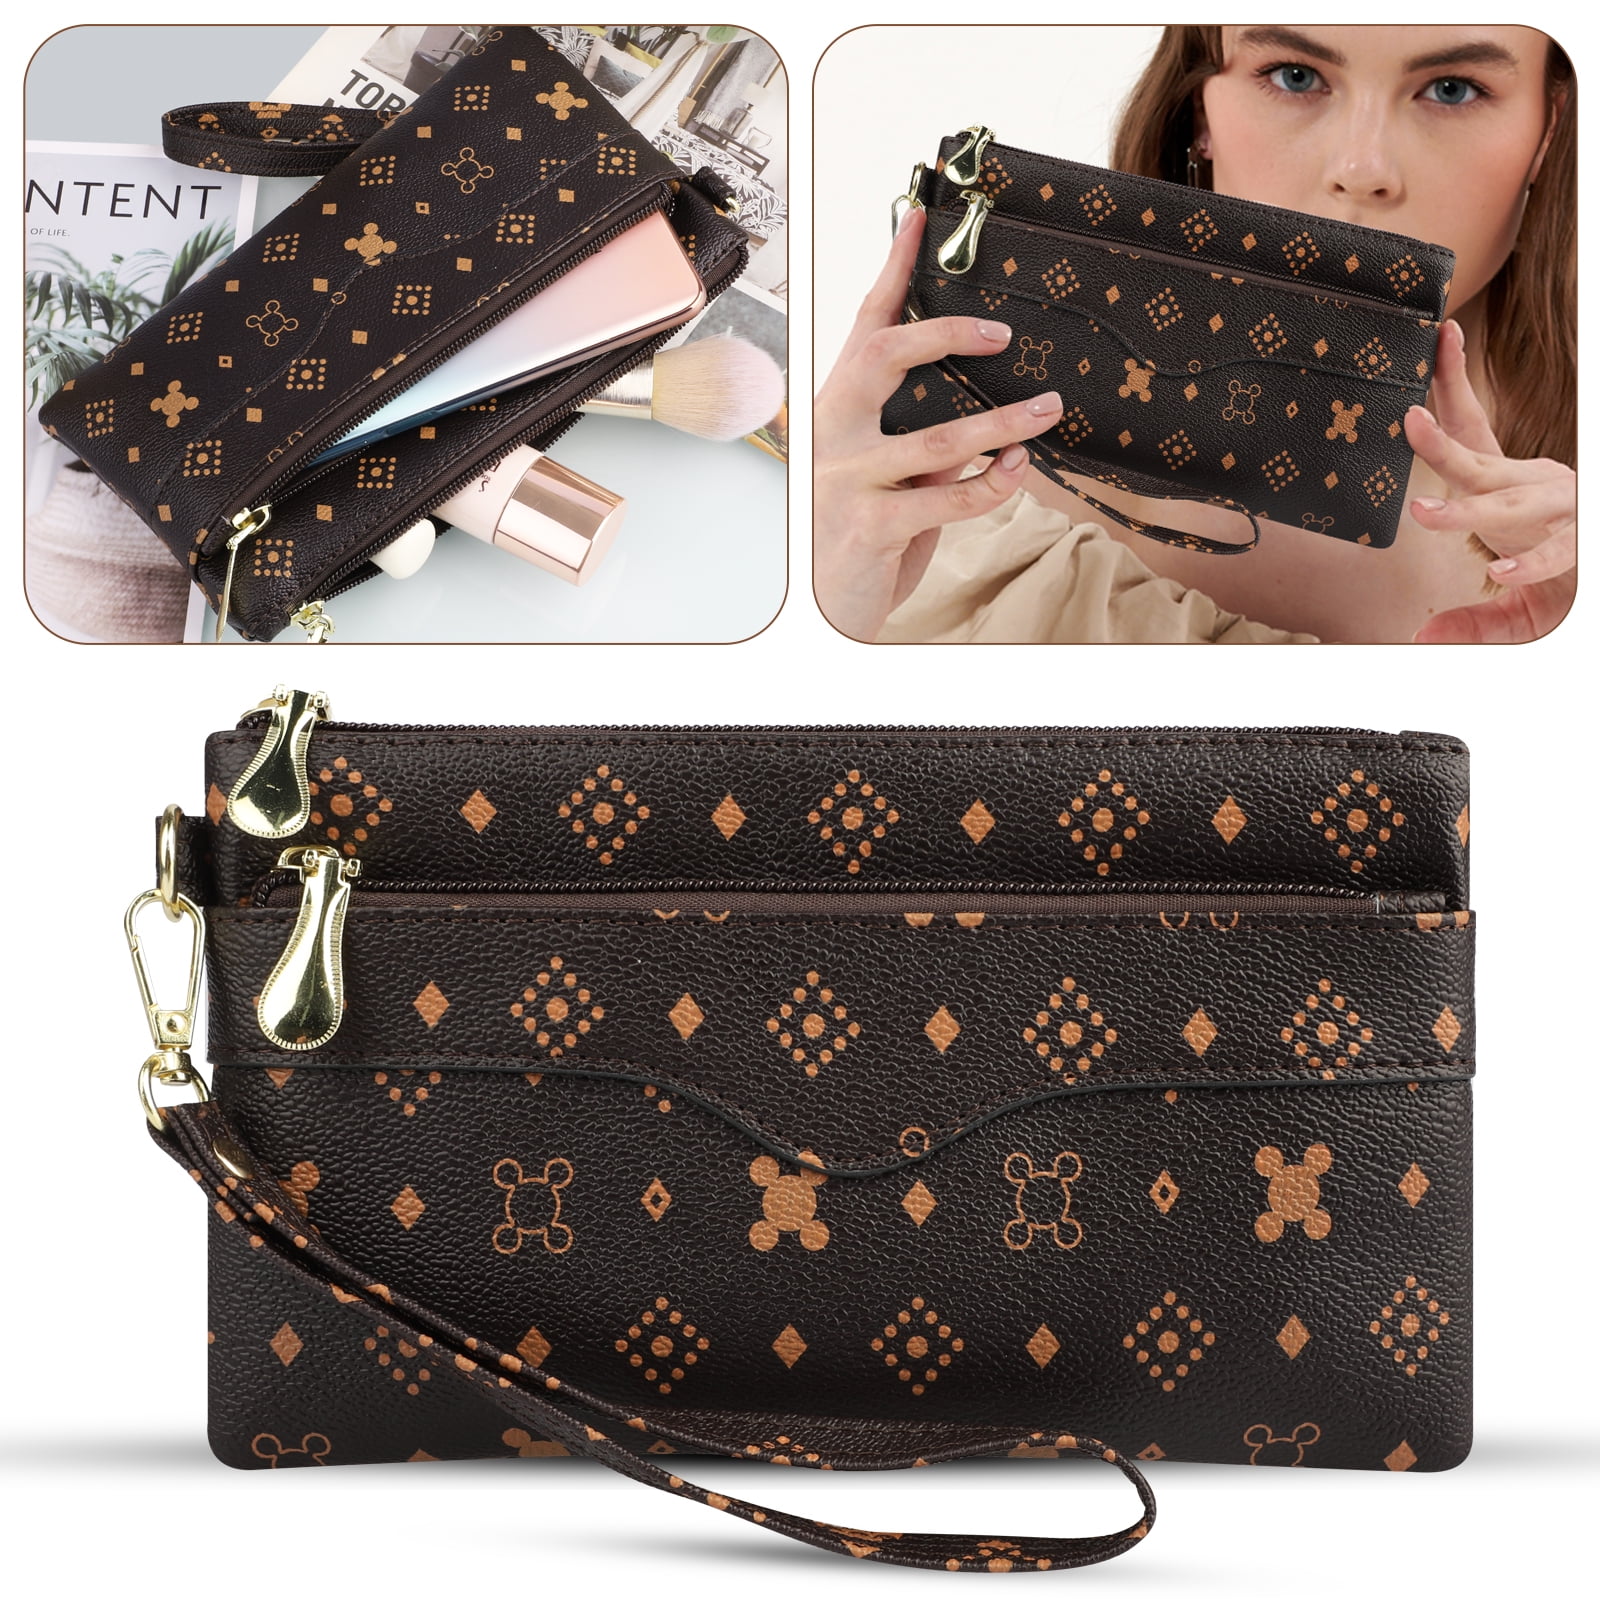 MOMU Women Oil Painting Pattern Wallet PU Leather Card Holder Coin Purse Clutch Handbag Bags 